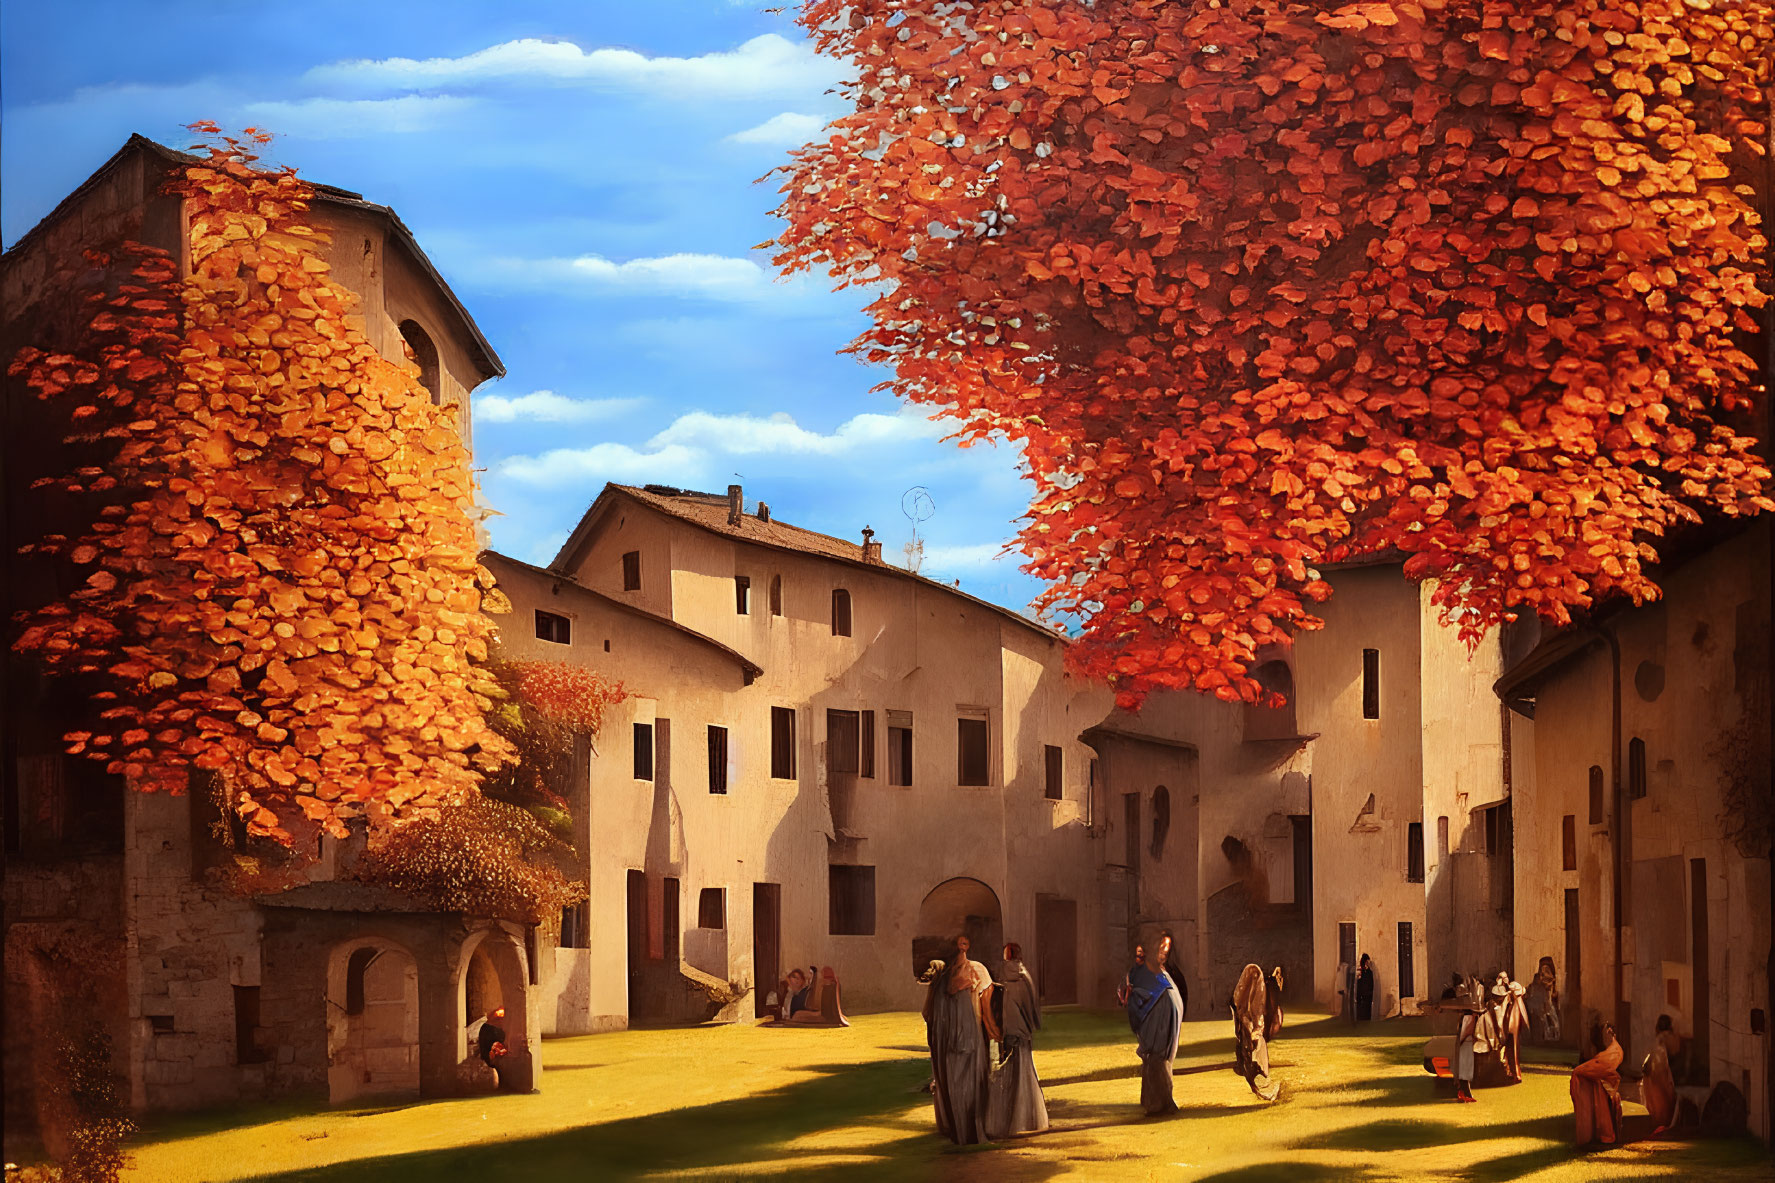 Medieval village scene with people in period clothing under autumn tree